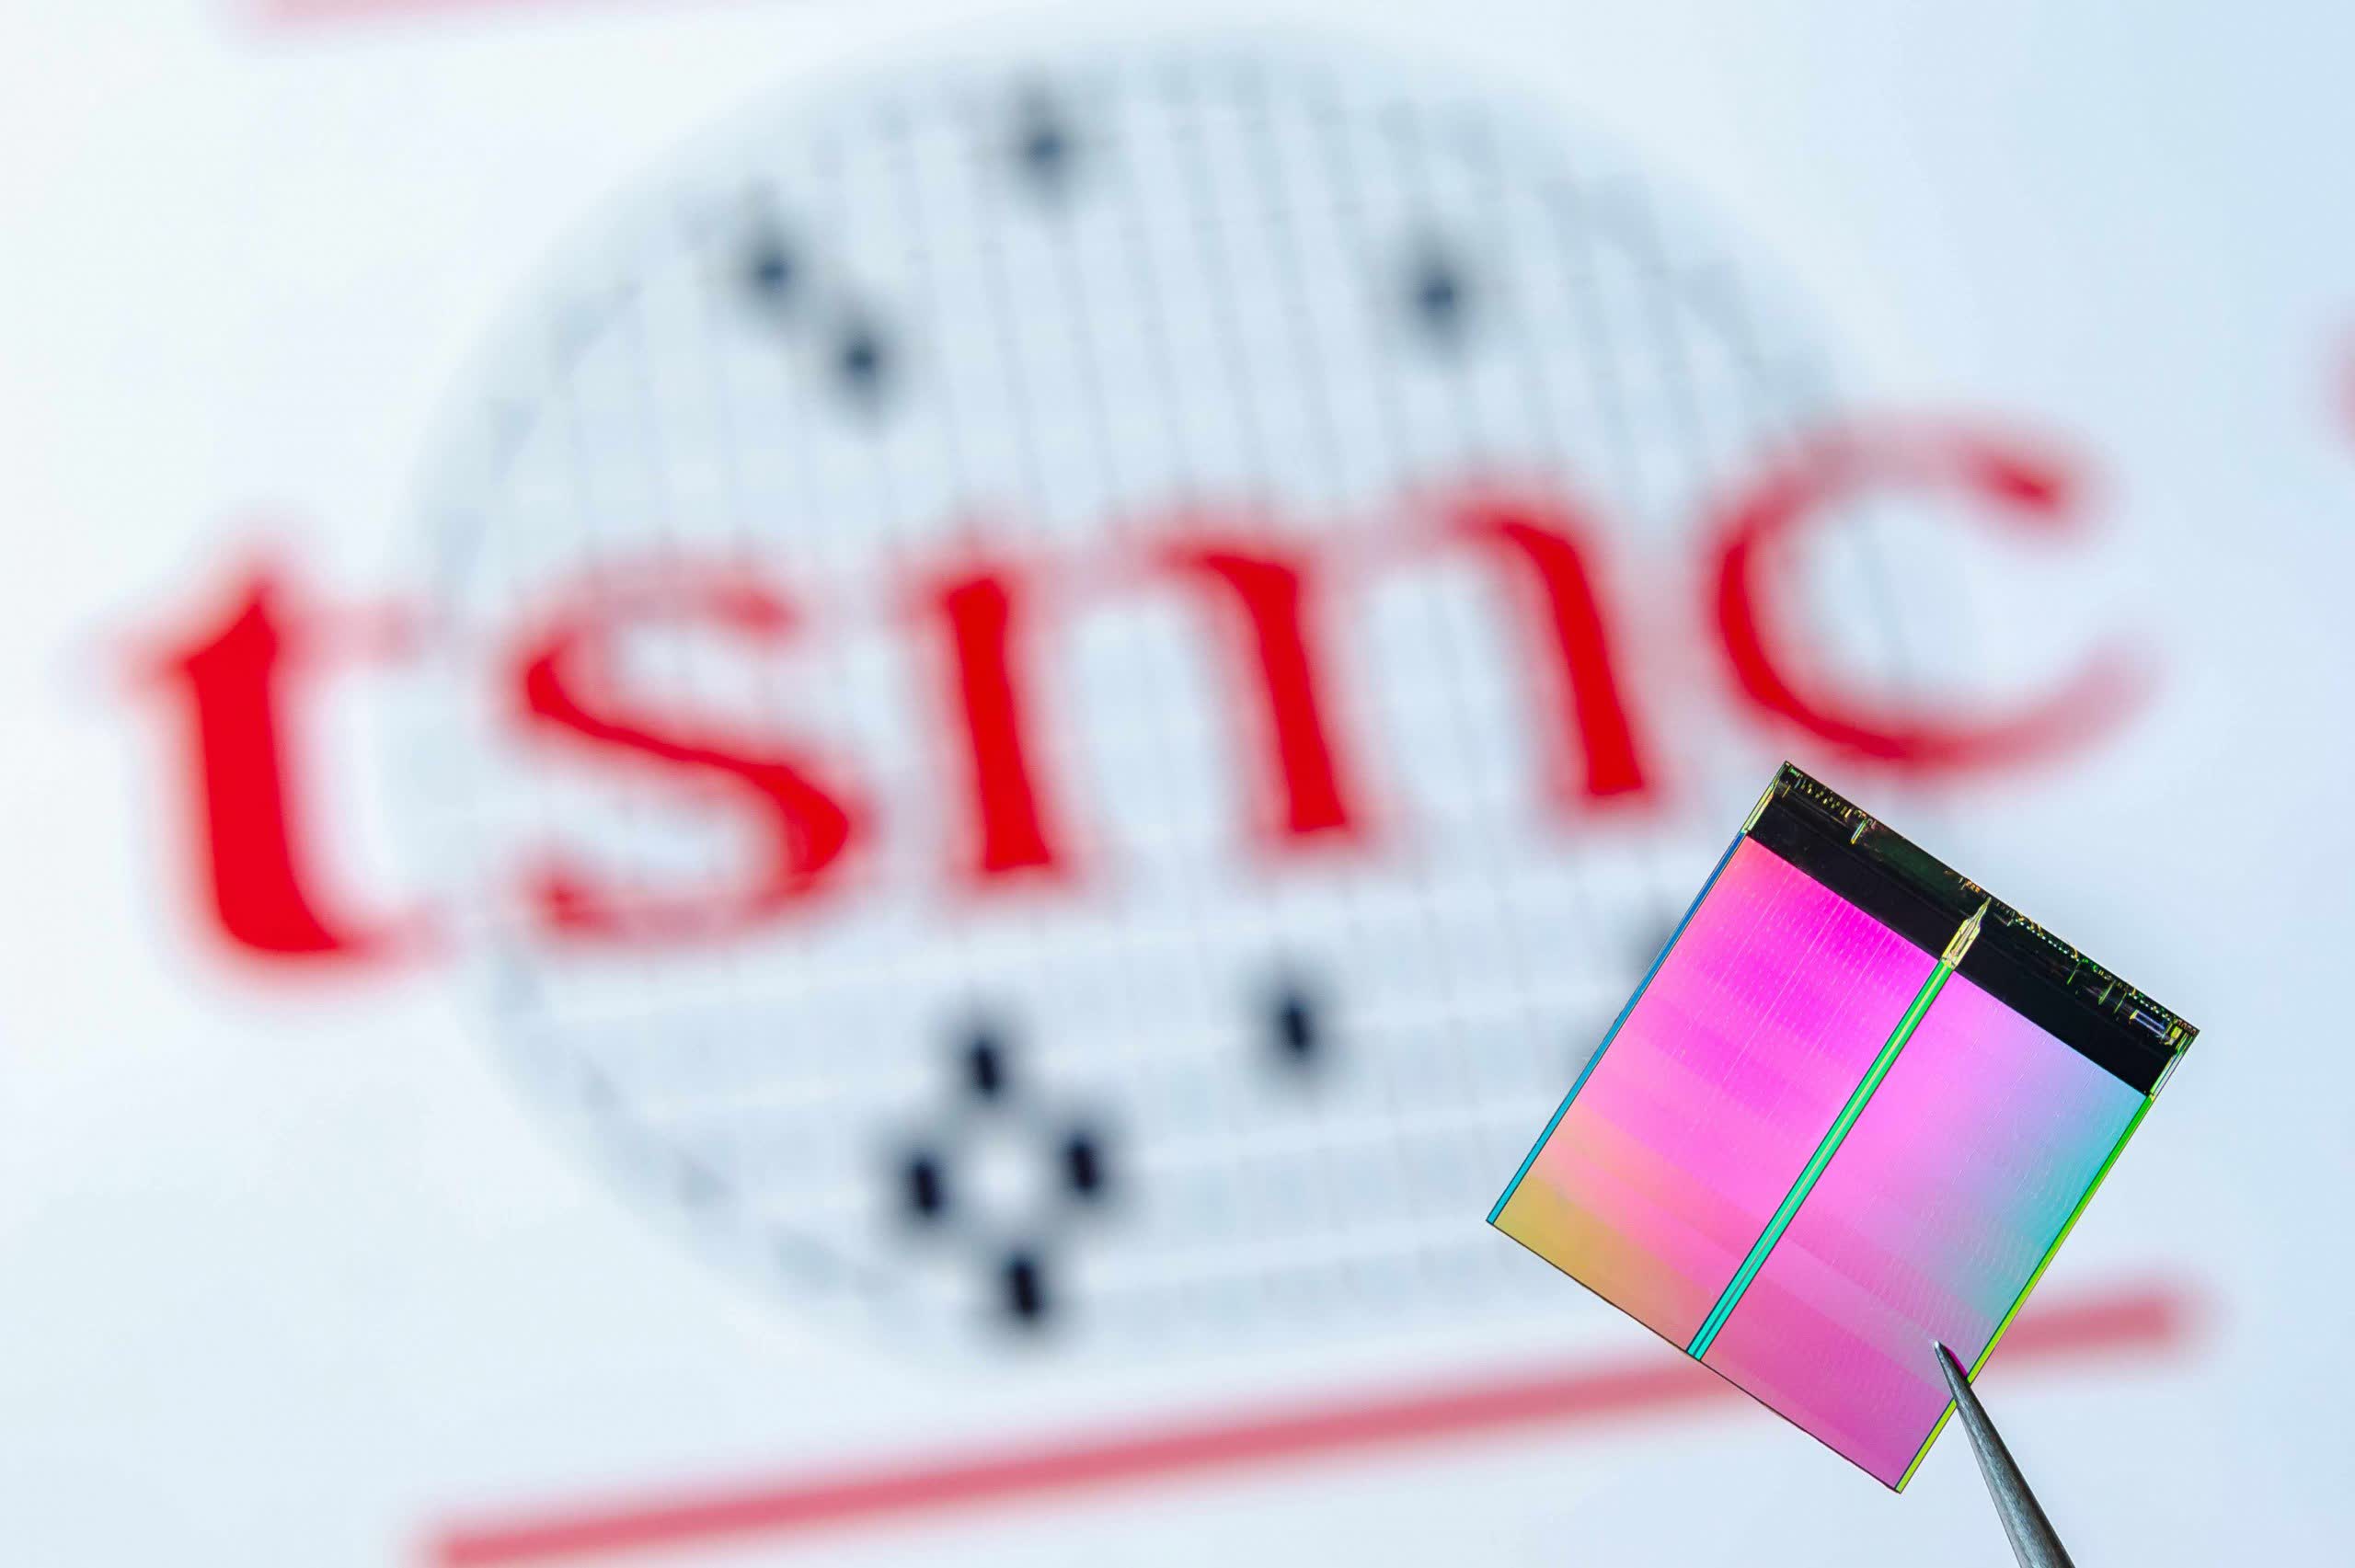 TSMC accounts for half of industry's EUV equipment installation base and wafer production